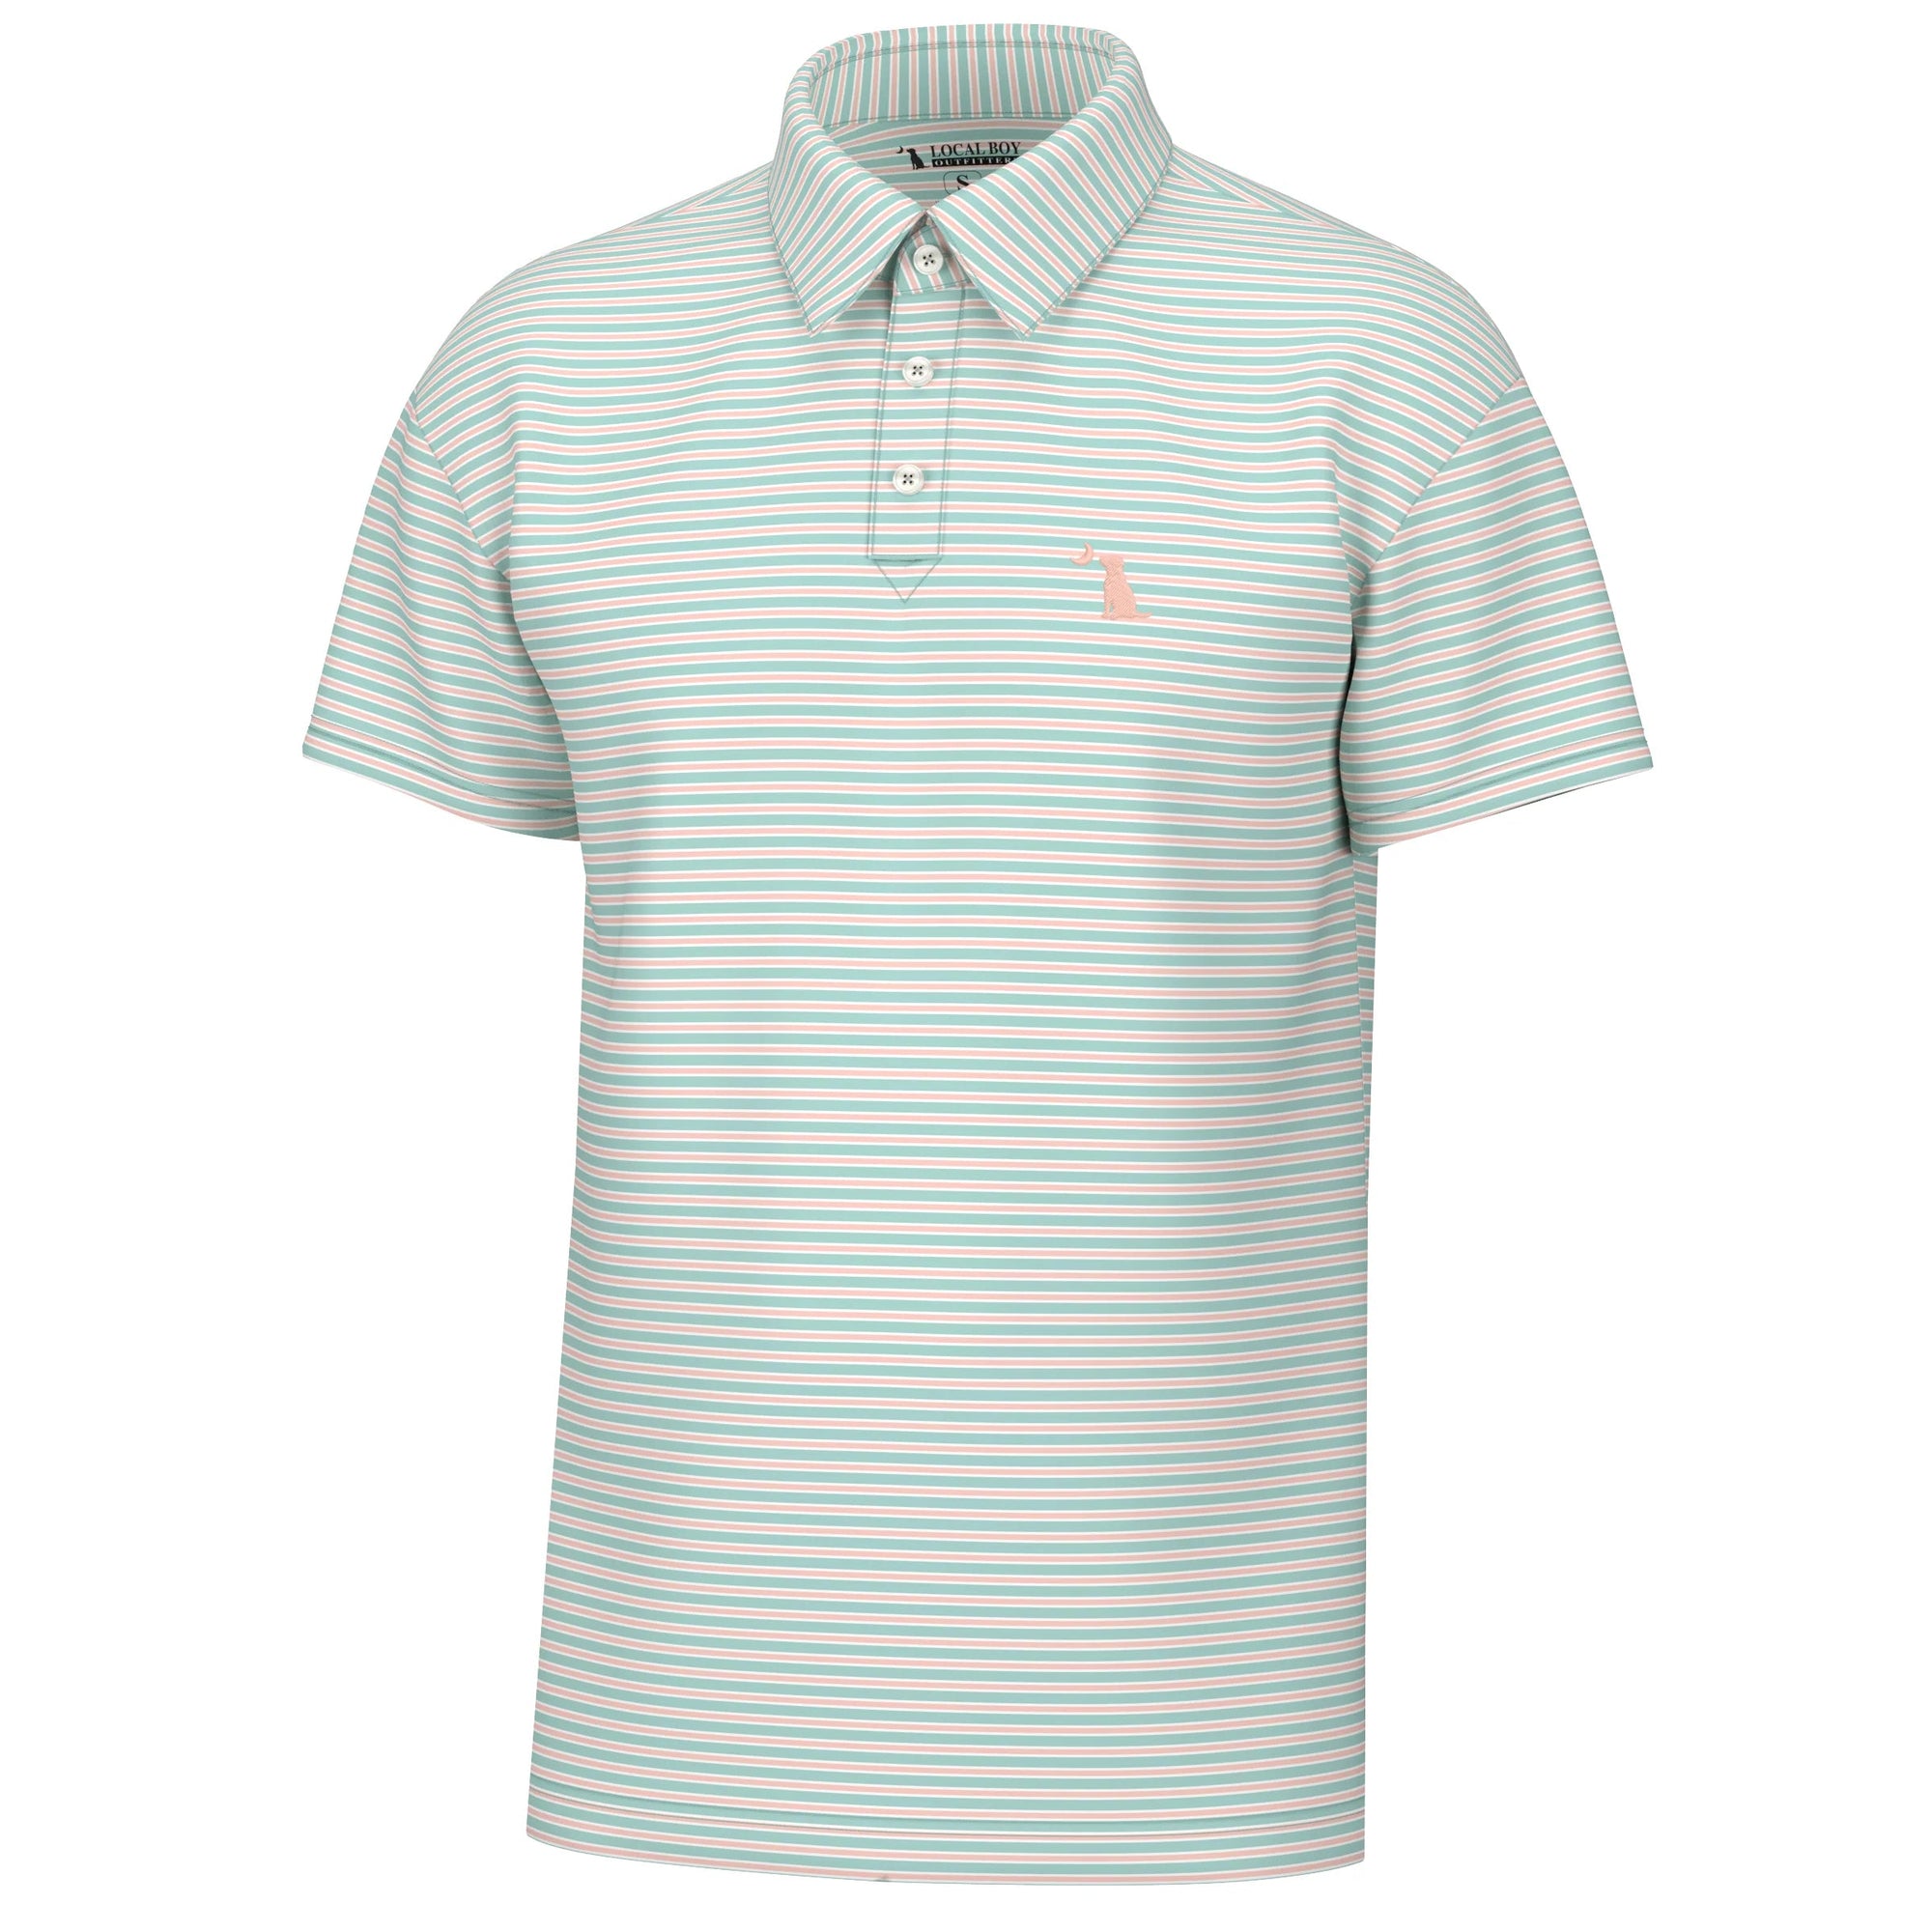 LOCAL BOY OUTFITTERS Men's Polo TEAL/CORAL / M Local Boy Surfside Polo || David's Clothing L1200022TCW